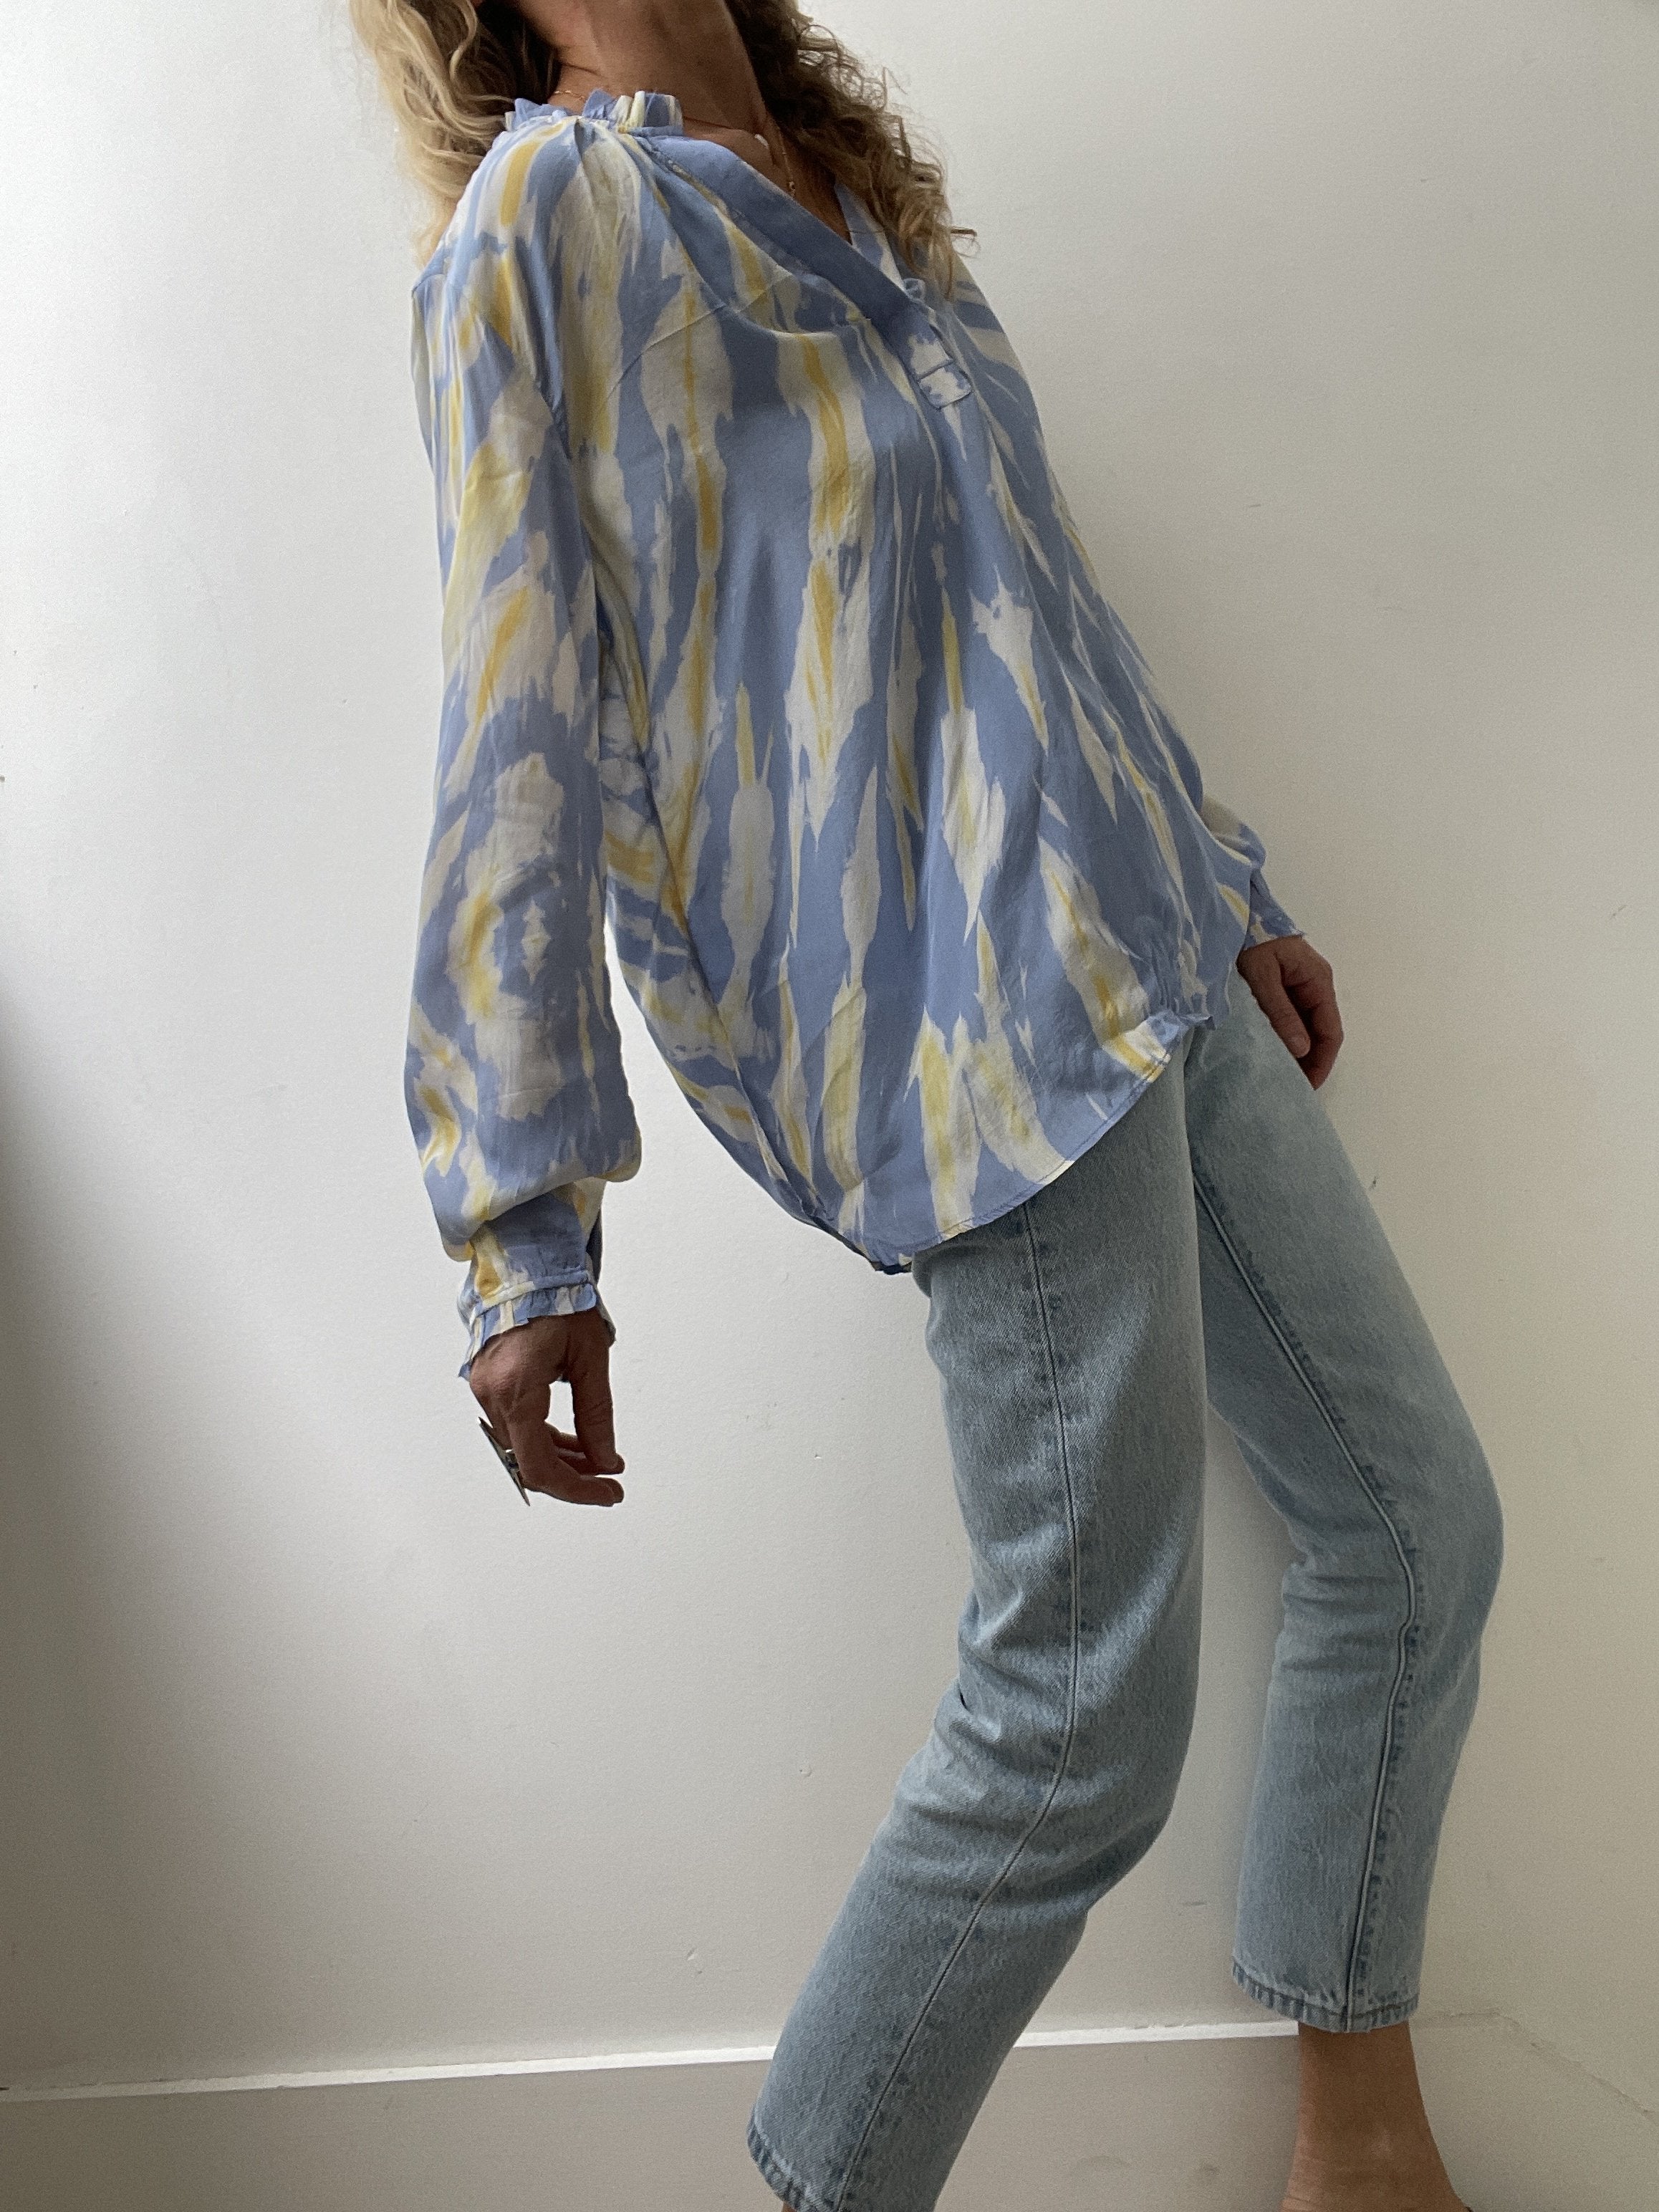 Project AJ 117 Blouses Project AJ 117 Glory Blouse in Blue & Yellow